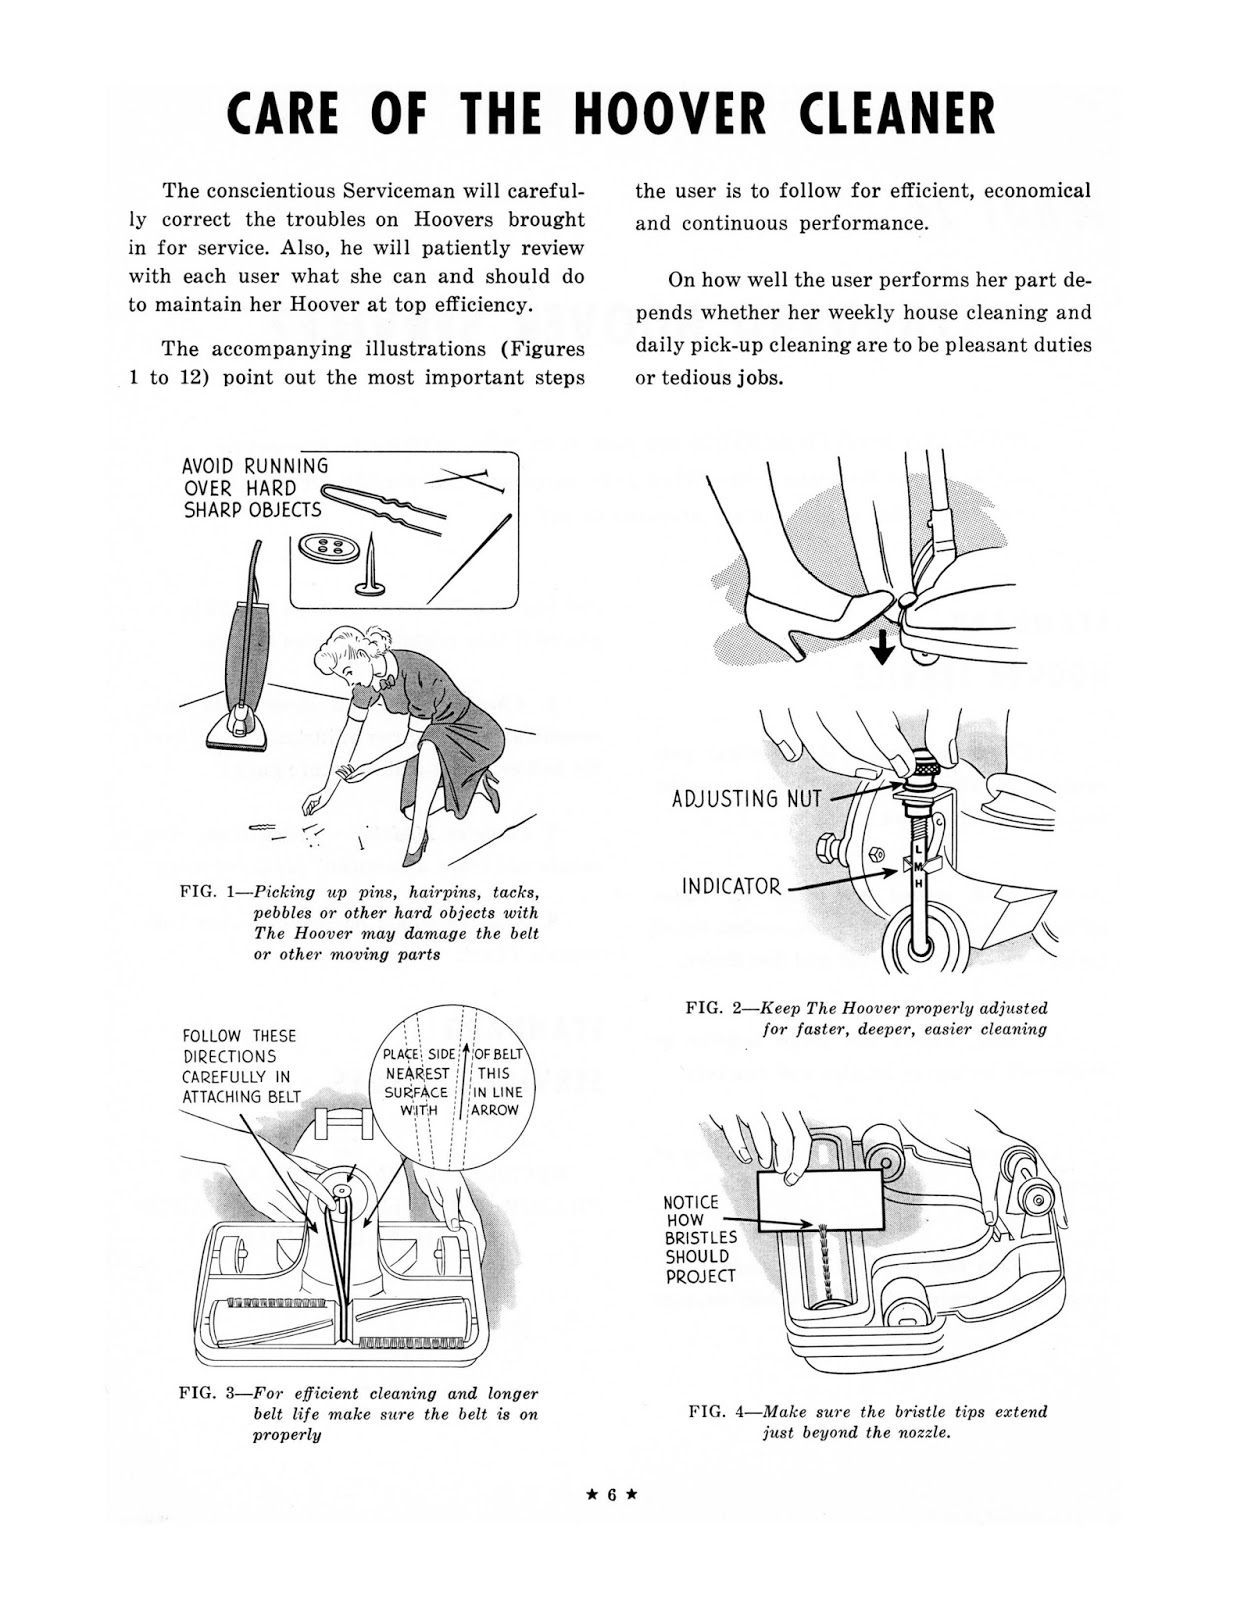 1957 Hoover US Service Manual